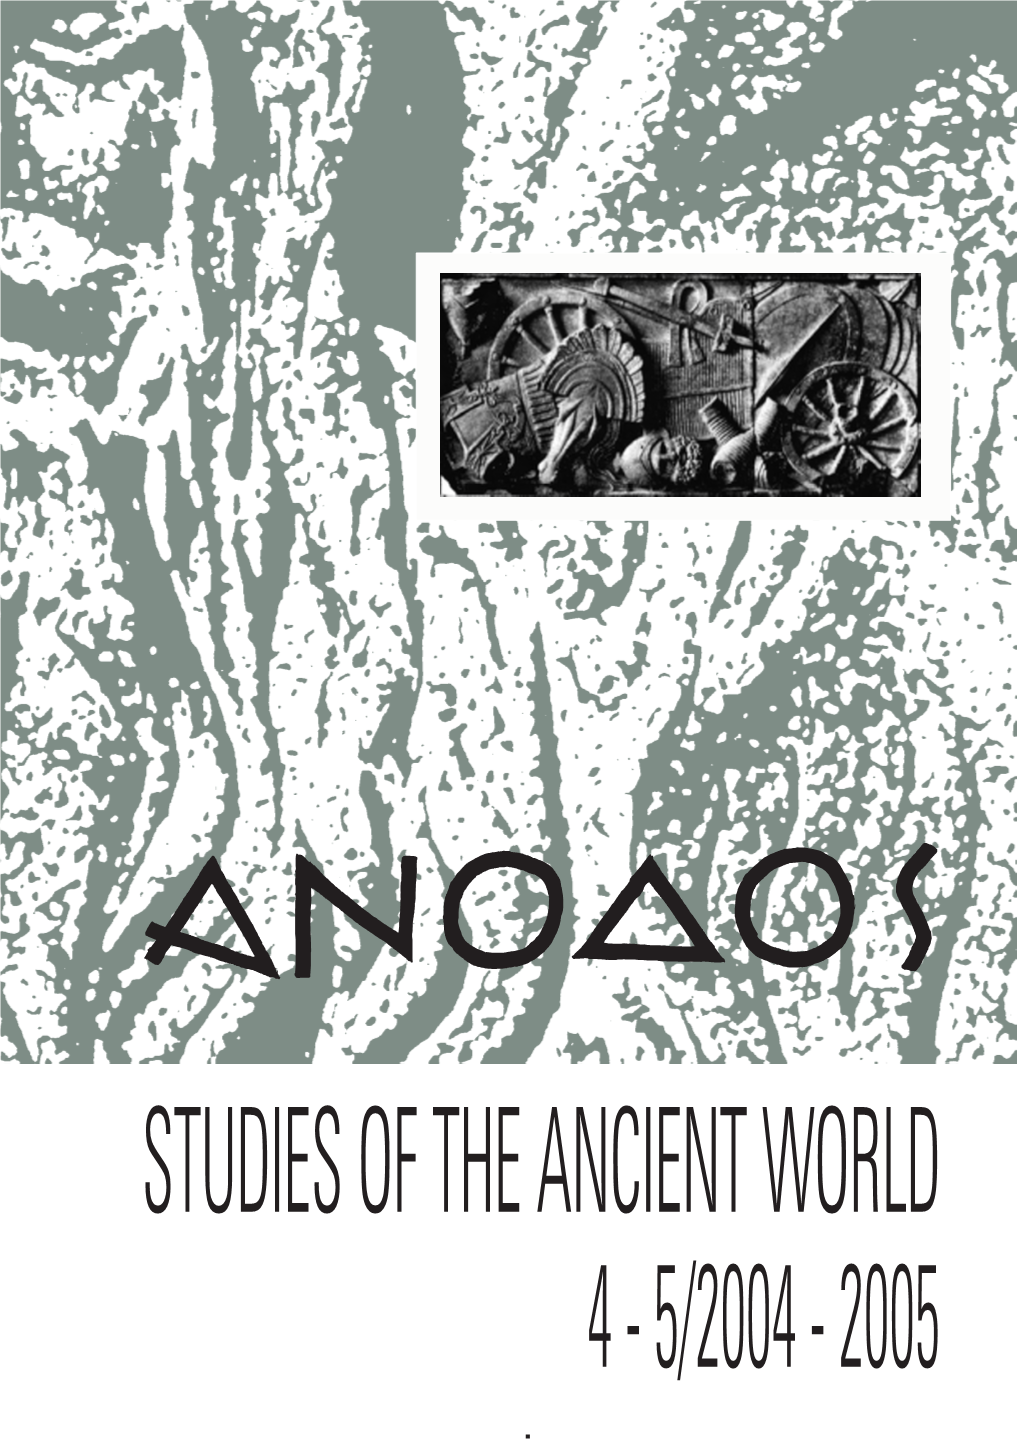 Studies of the Ancient World 4 - 5/2004 - 2005